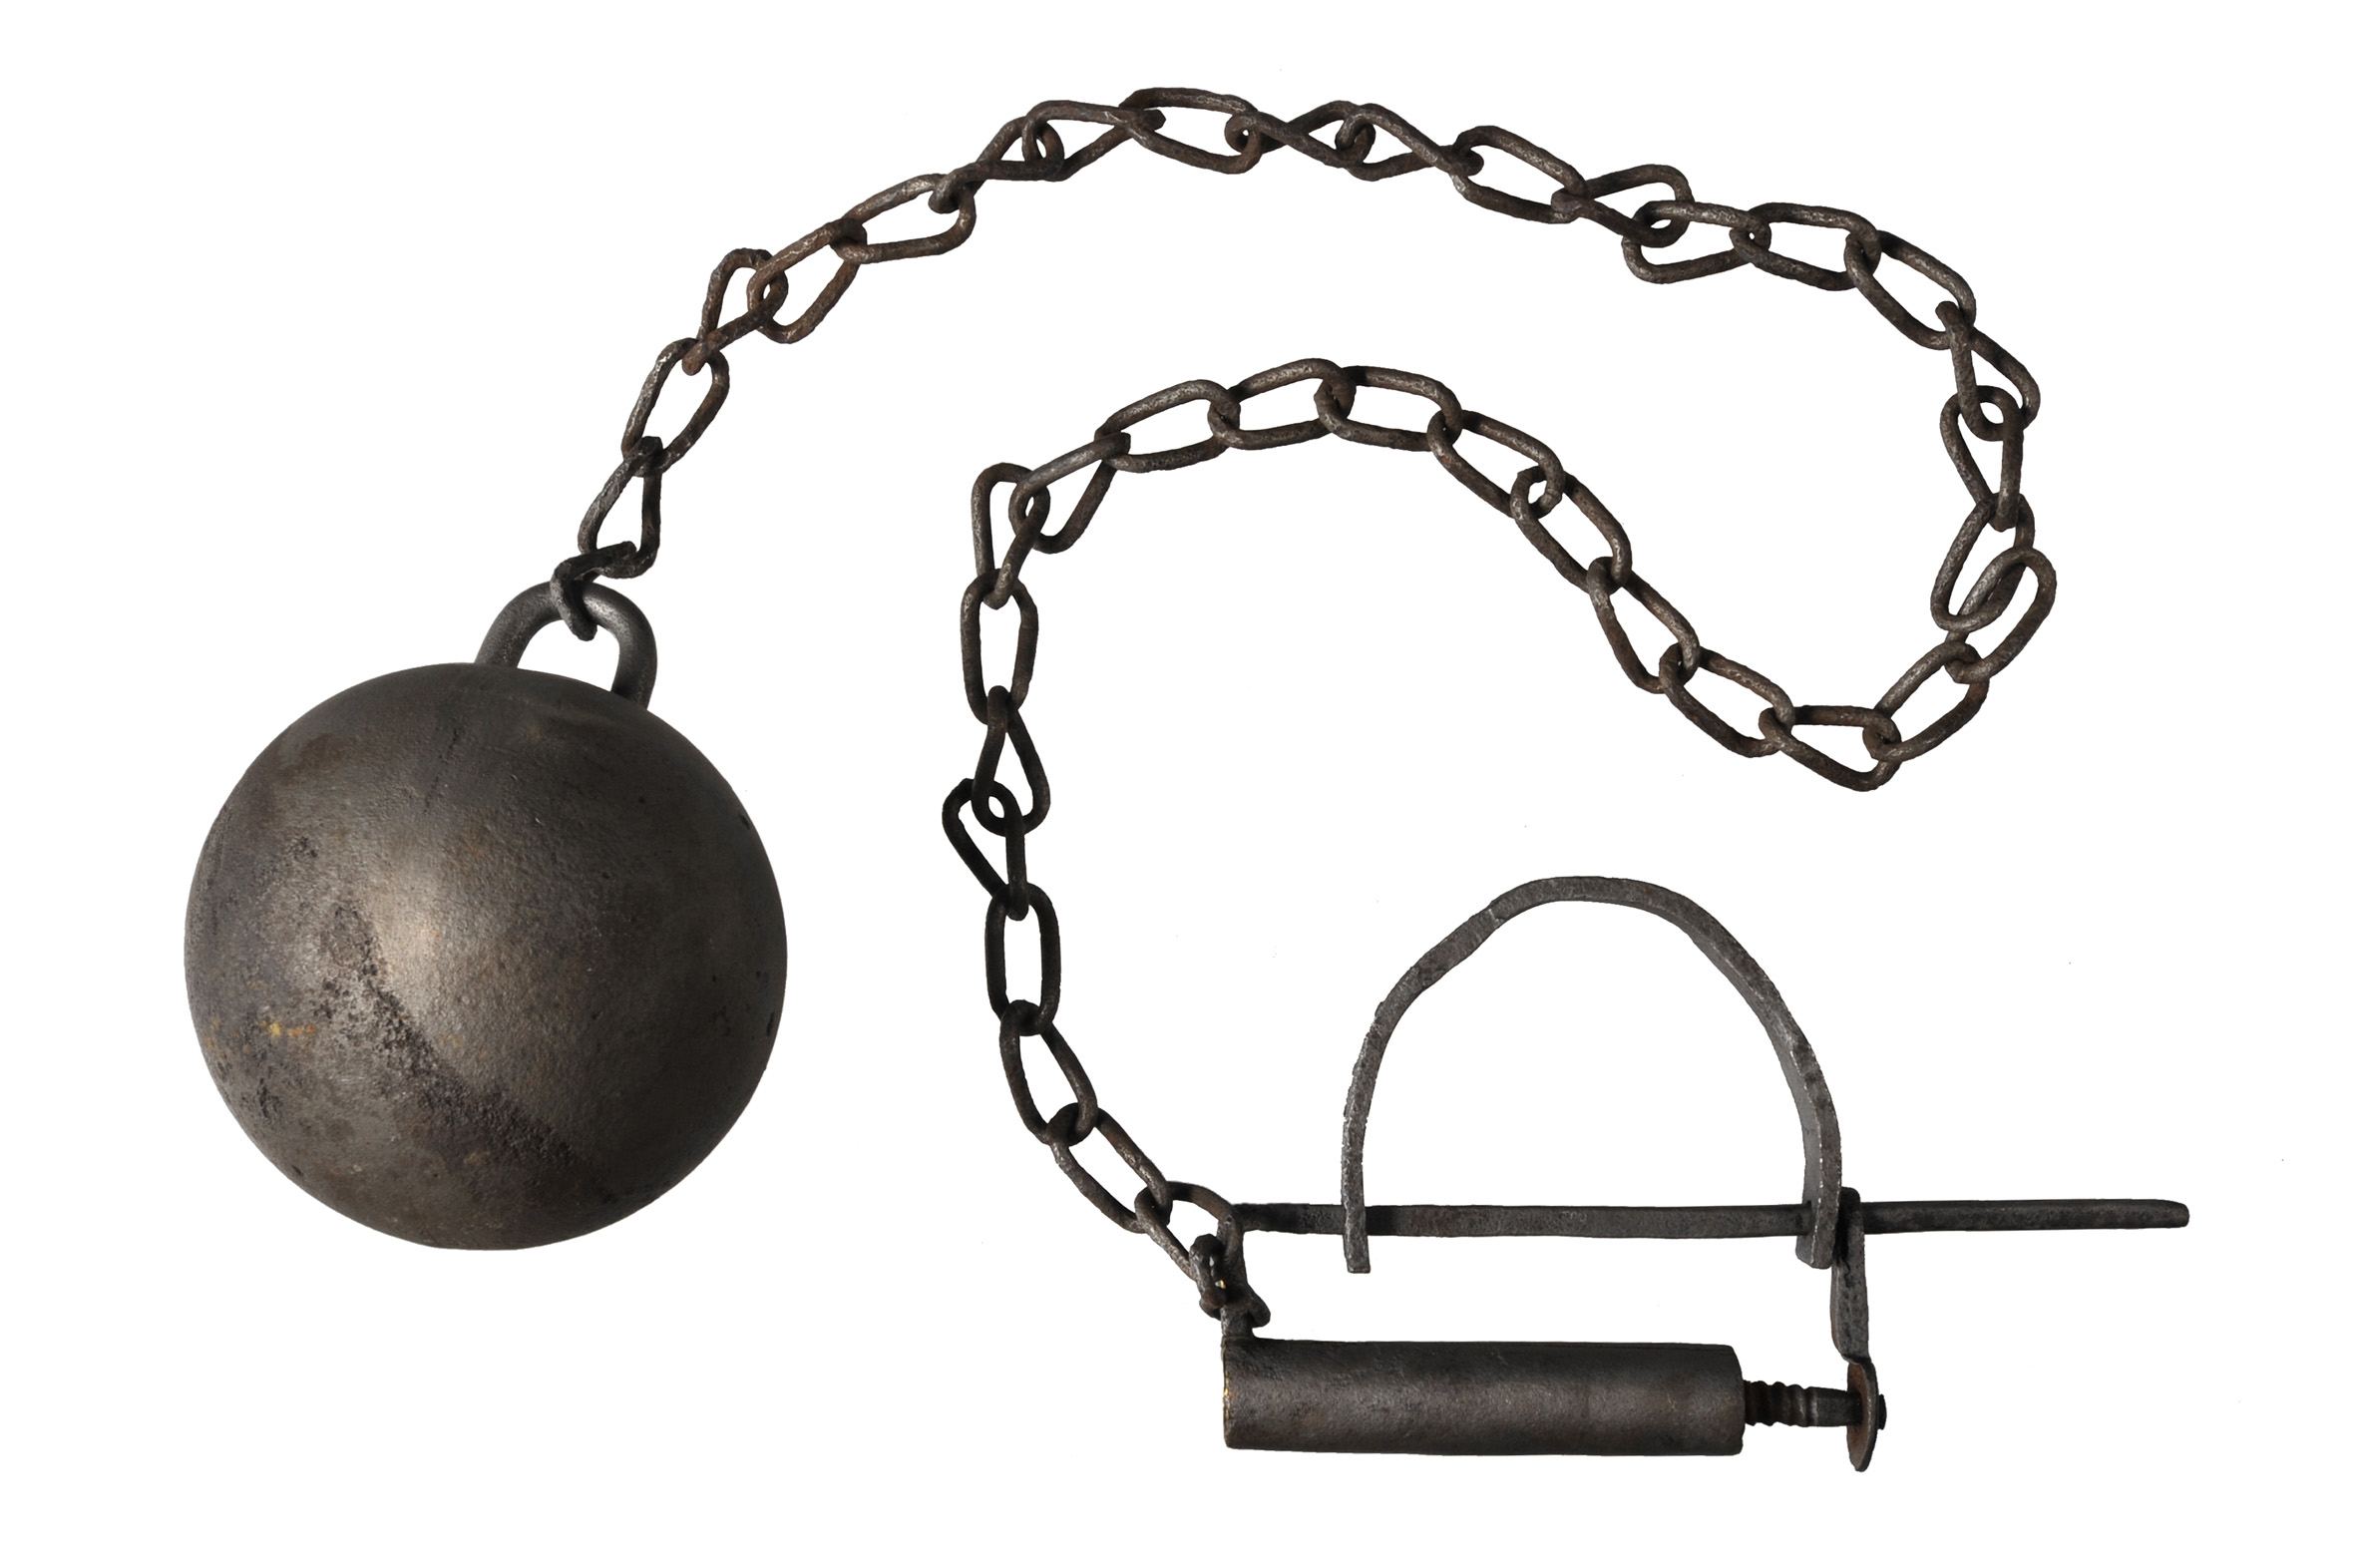 300-year-old shackles may hold ghoulish tale